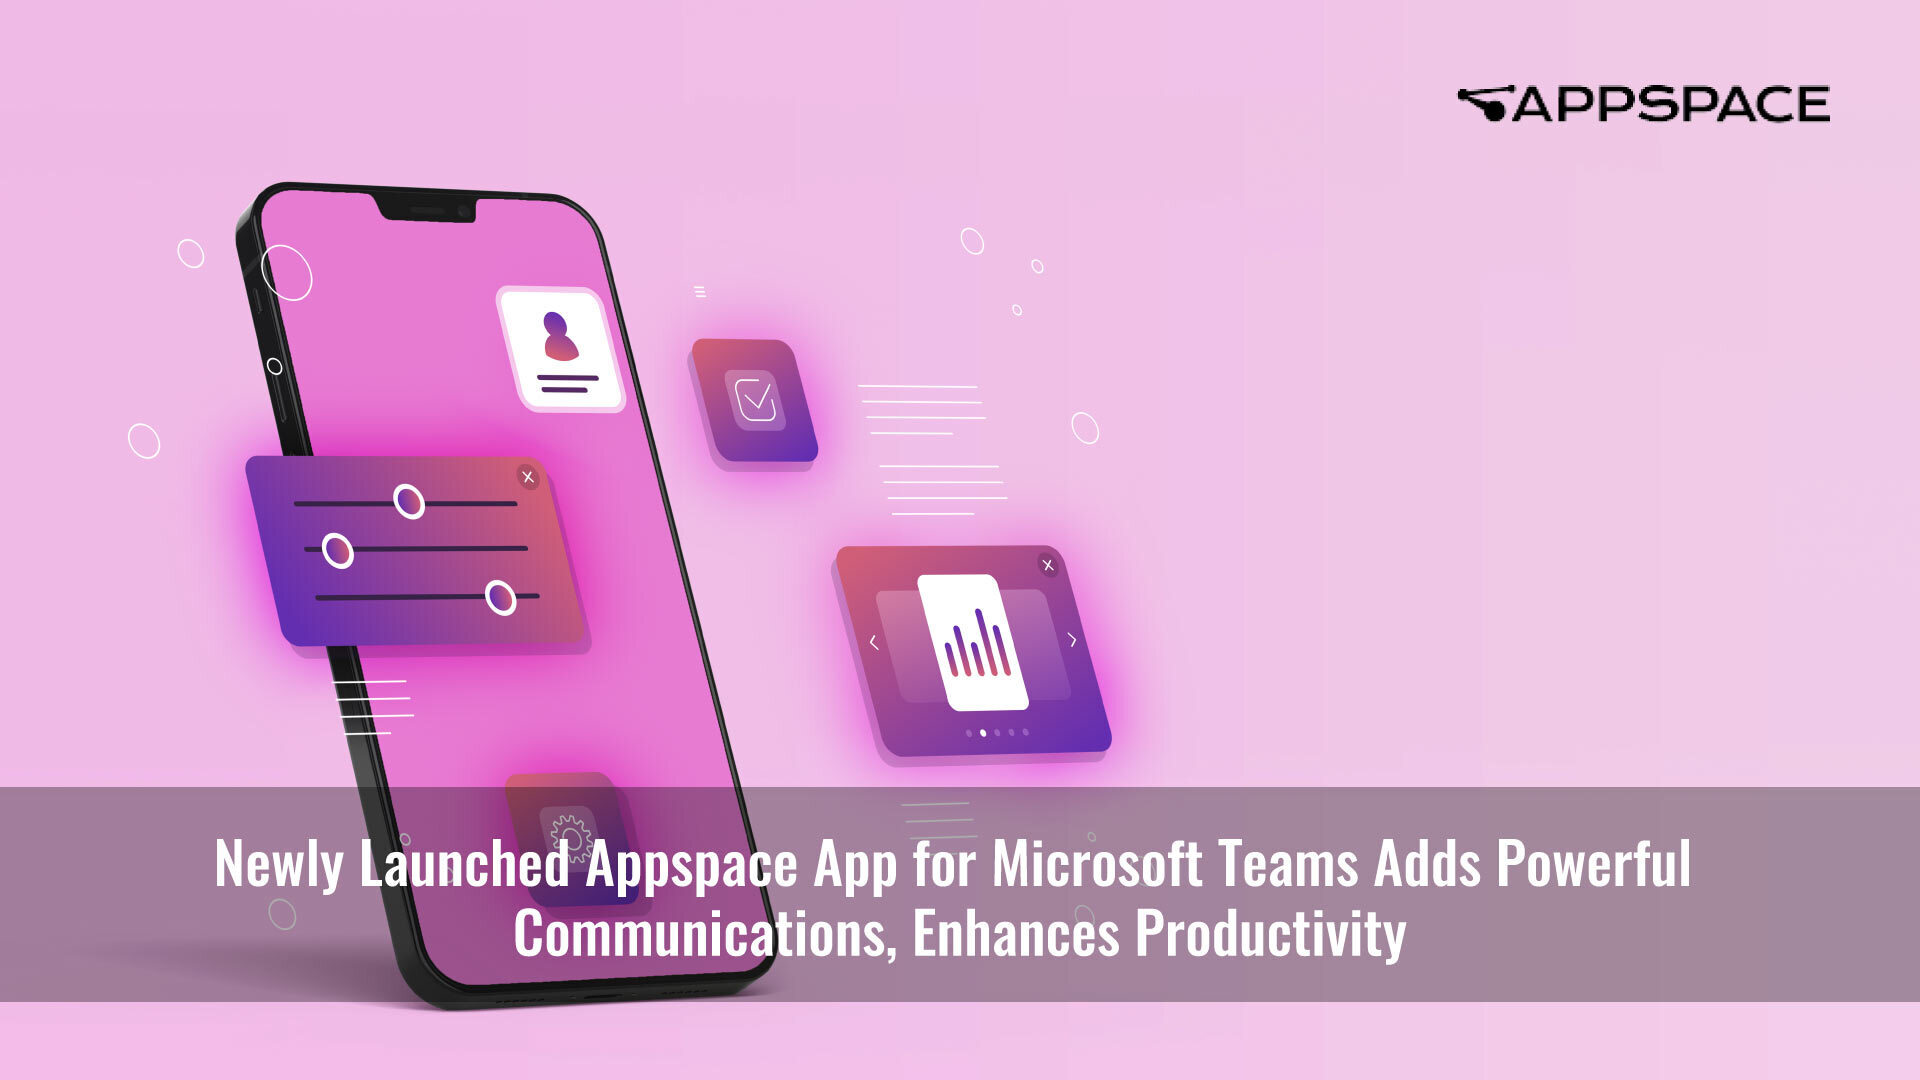 Newly Launched Appspace App for Microsoft Teams Adds Powerful Communications, Workplace Management Functionality Into Teams